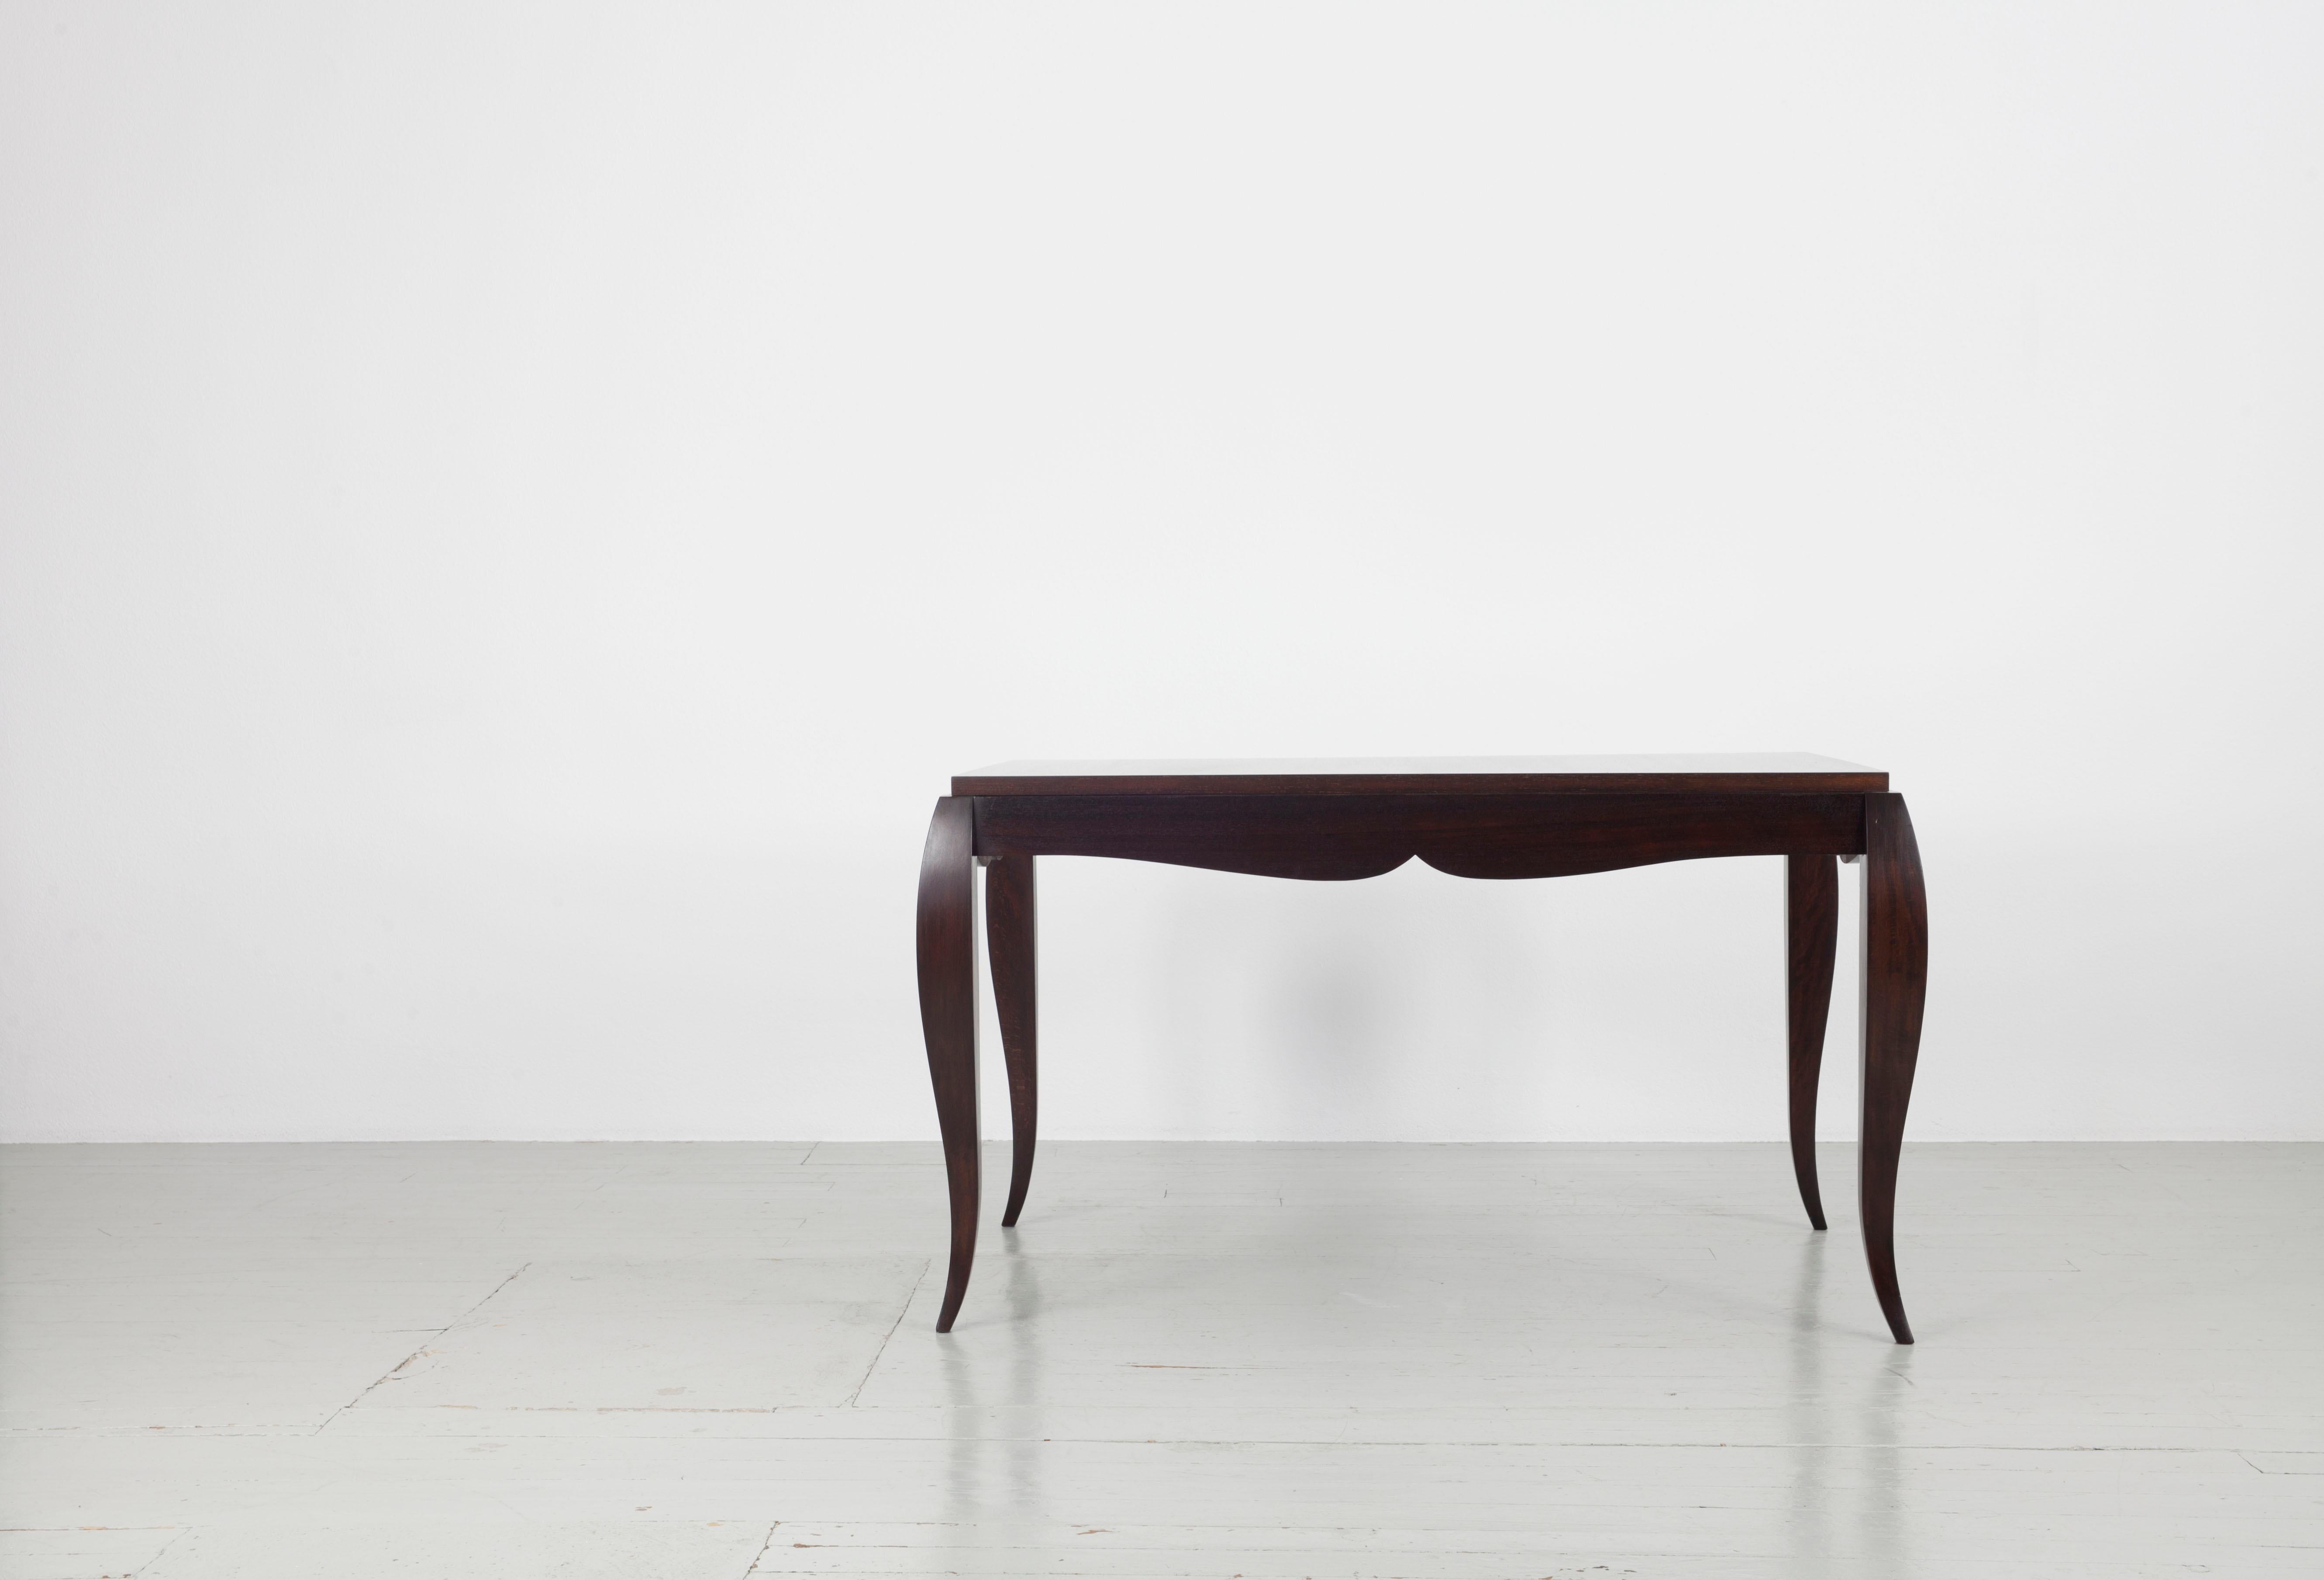 arched table legs